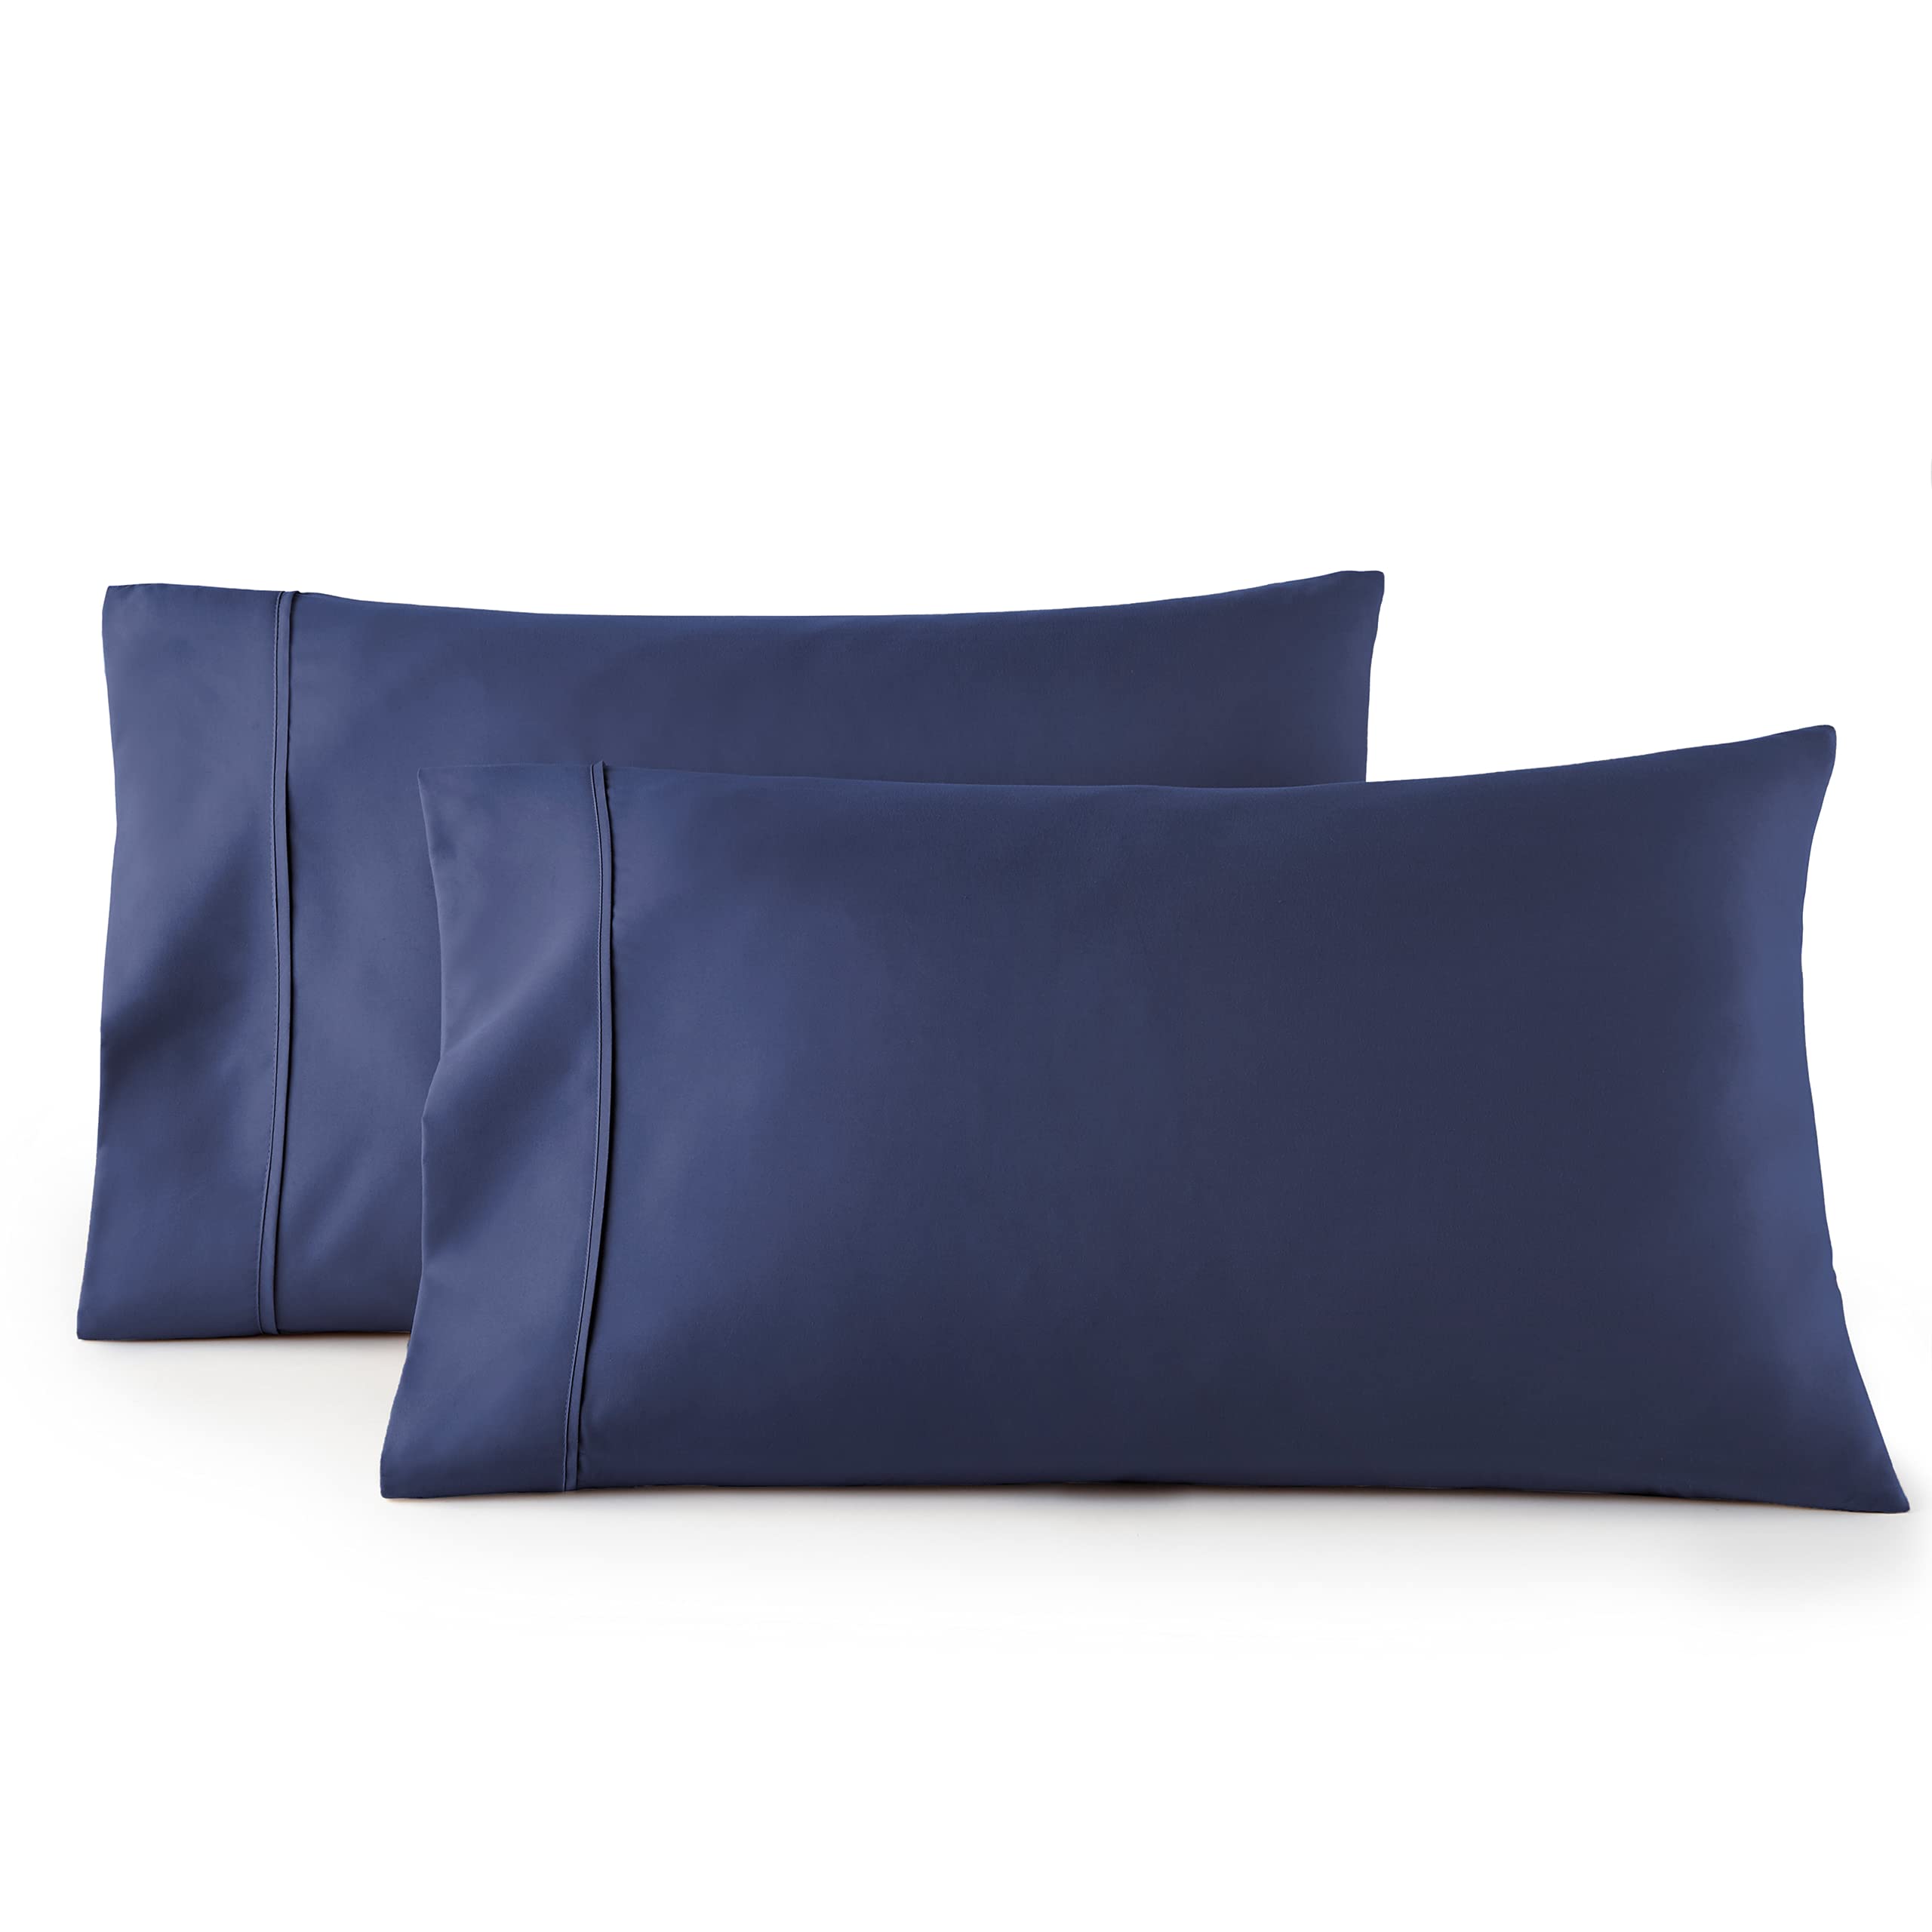 Book Cover HC COLLECTION Pillow Cases - Set of 2 King Size Pillowcases, 20